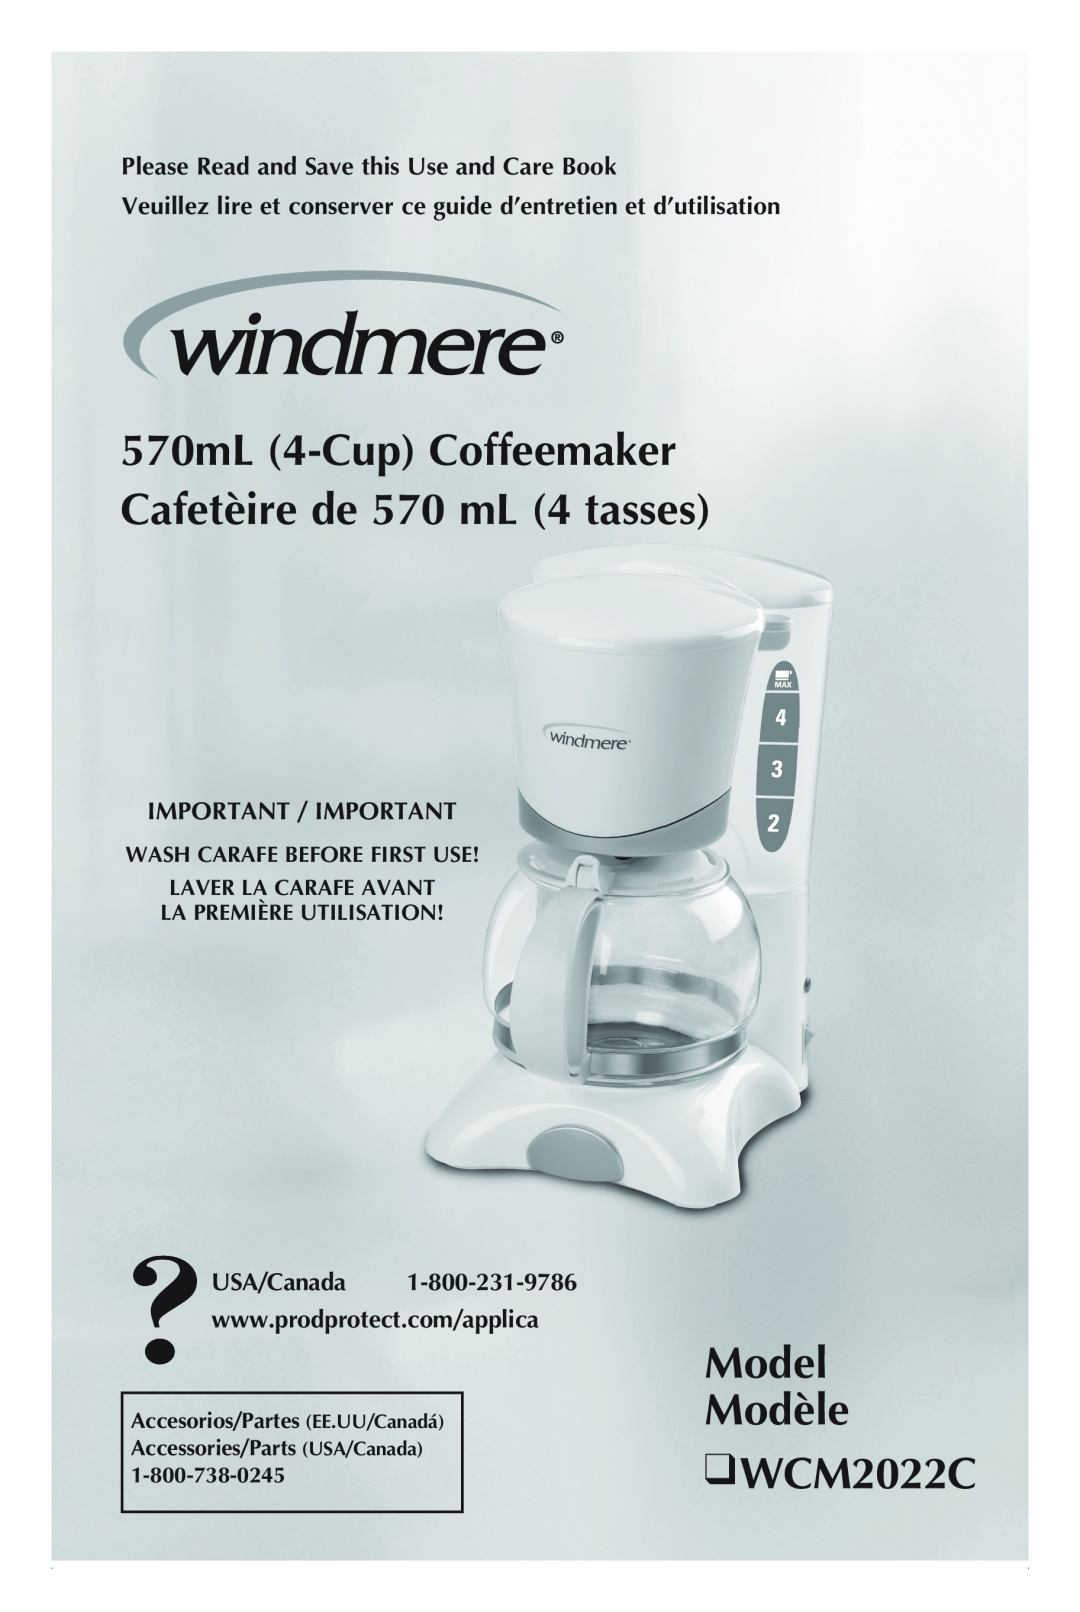 Windmere manual Model Modèle WCM2022C, Please Read and Save this Use and Care Book, Important / Important 